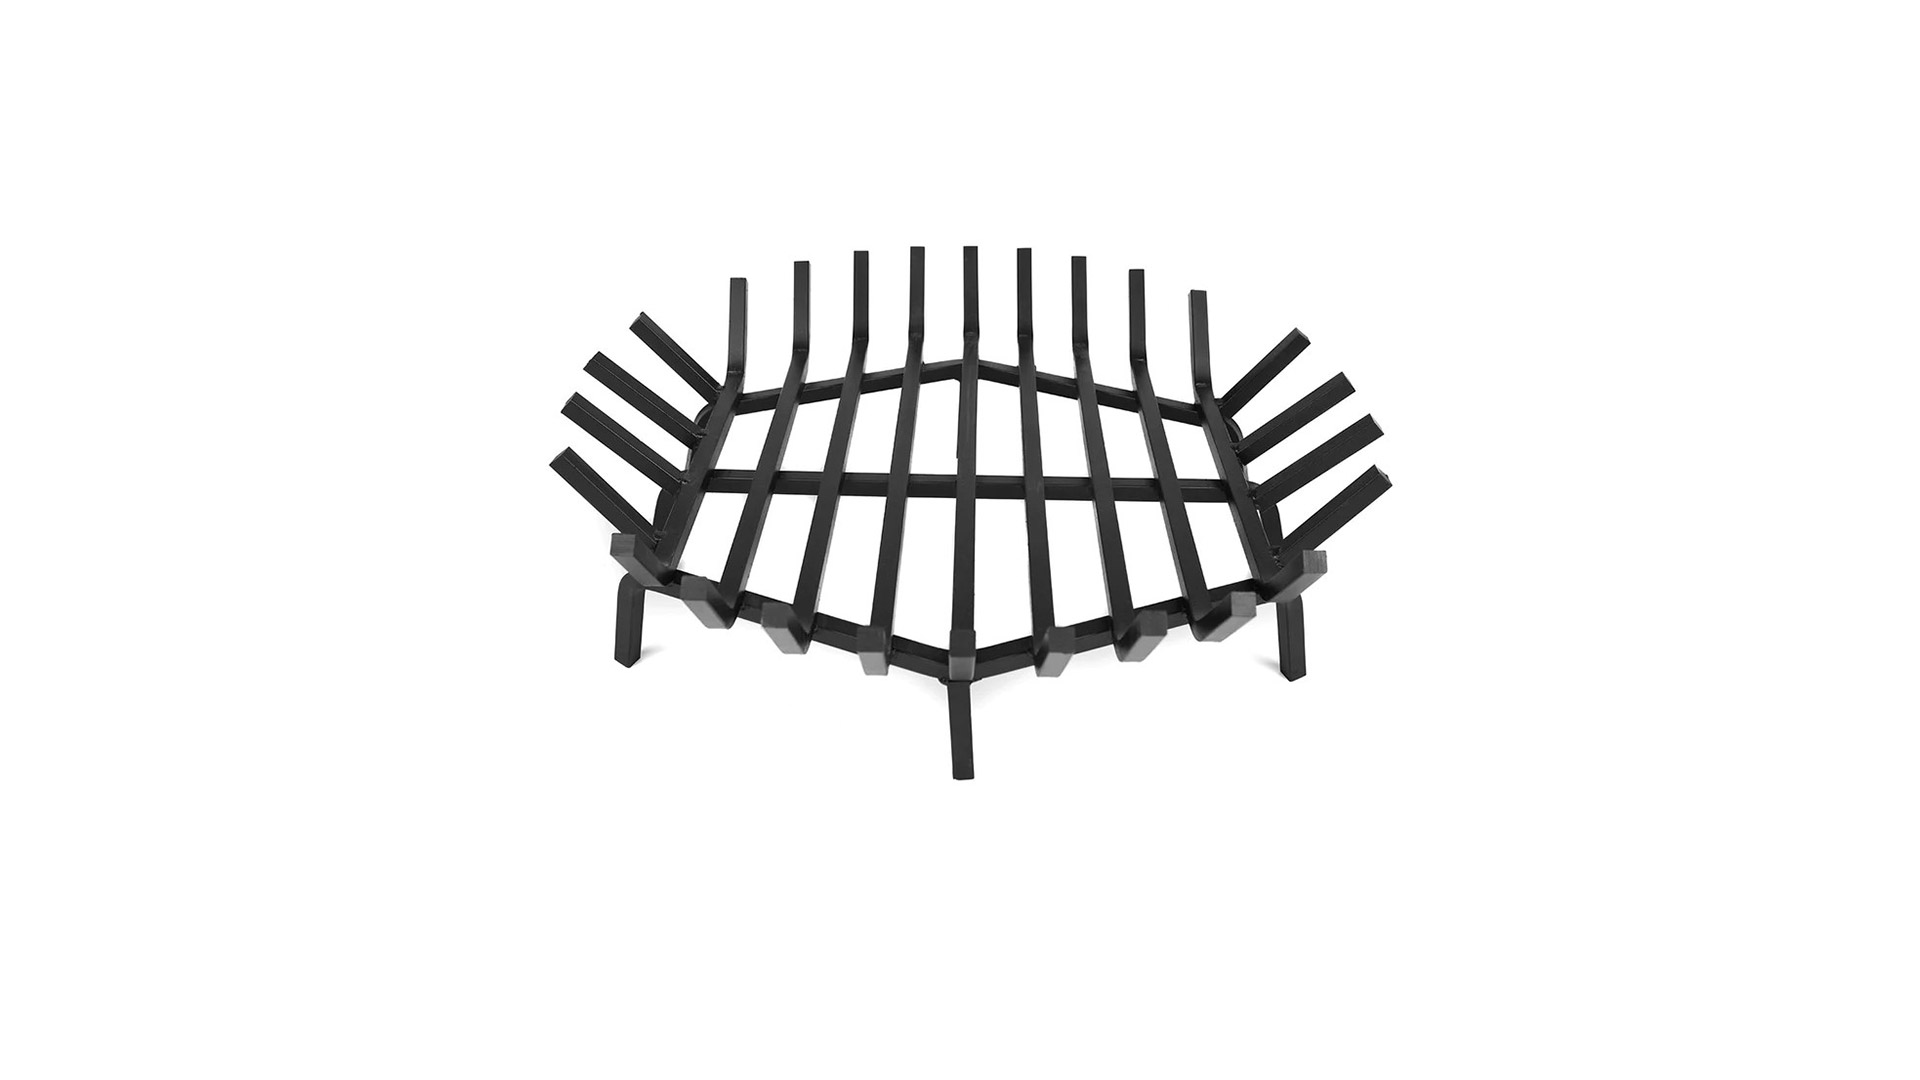 The-Stainless-Steel-Round-Grate-by-Aspen